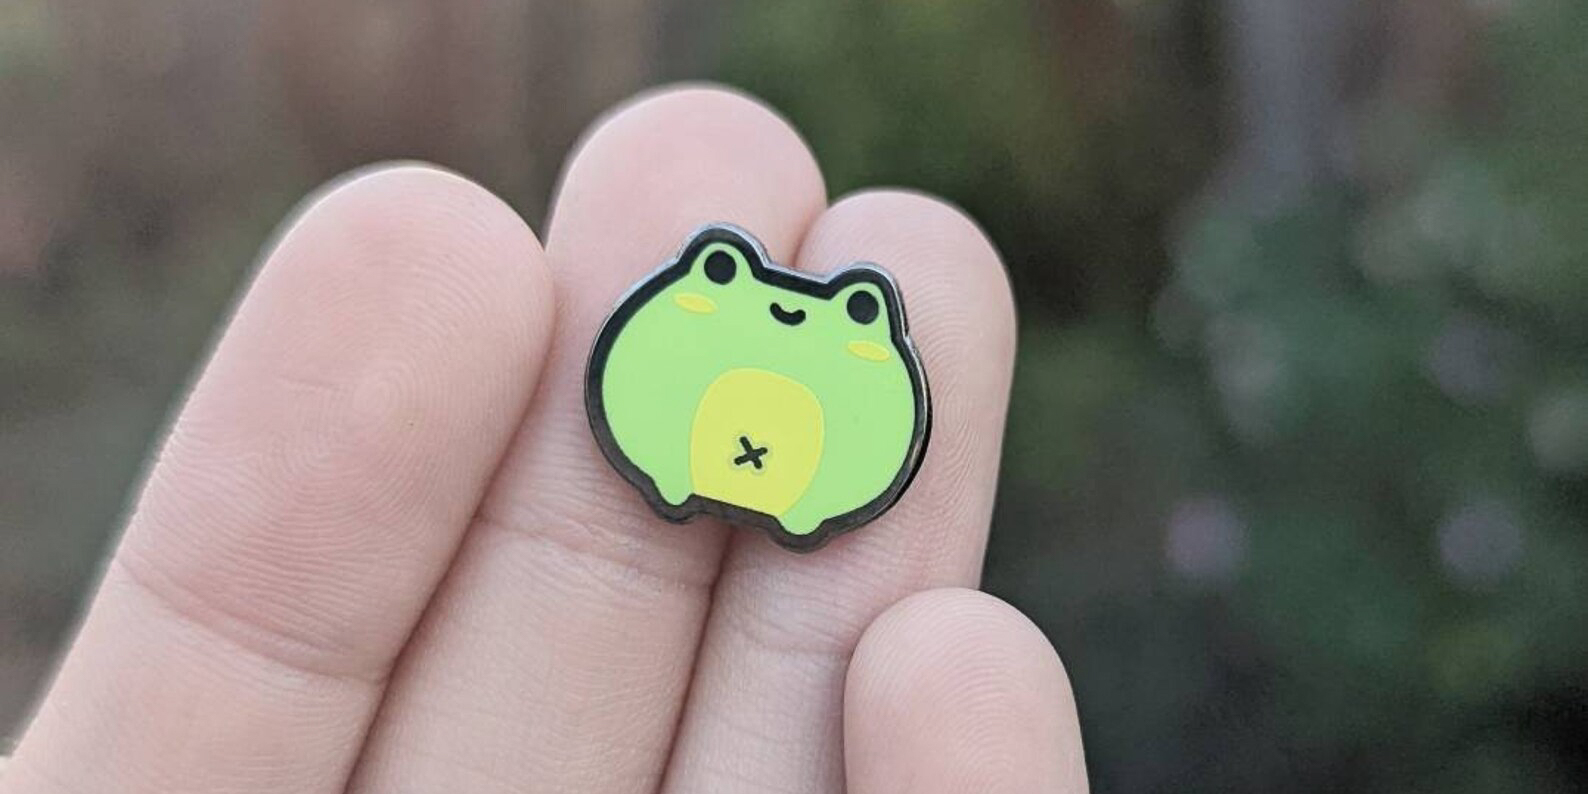 Frog enamel pin sold at Anqi Chens Etsy shop @Anqchii. Photo courtesy of Anqi Chen.